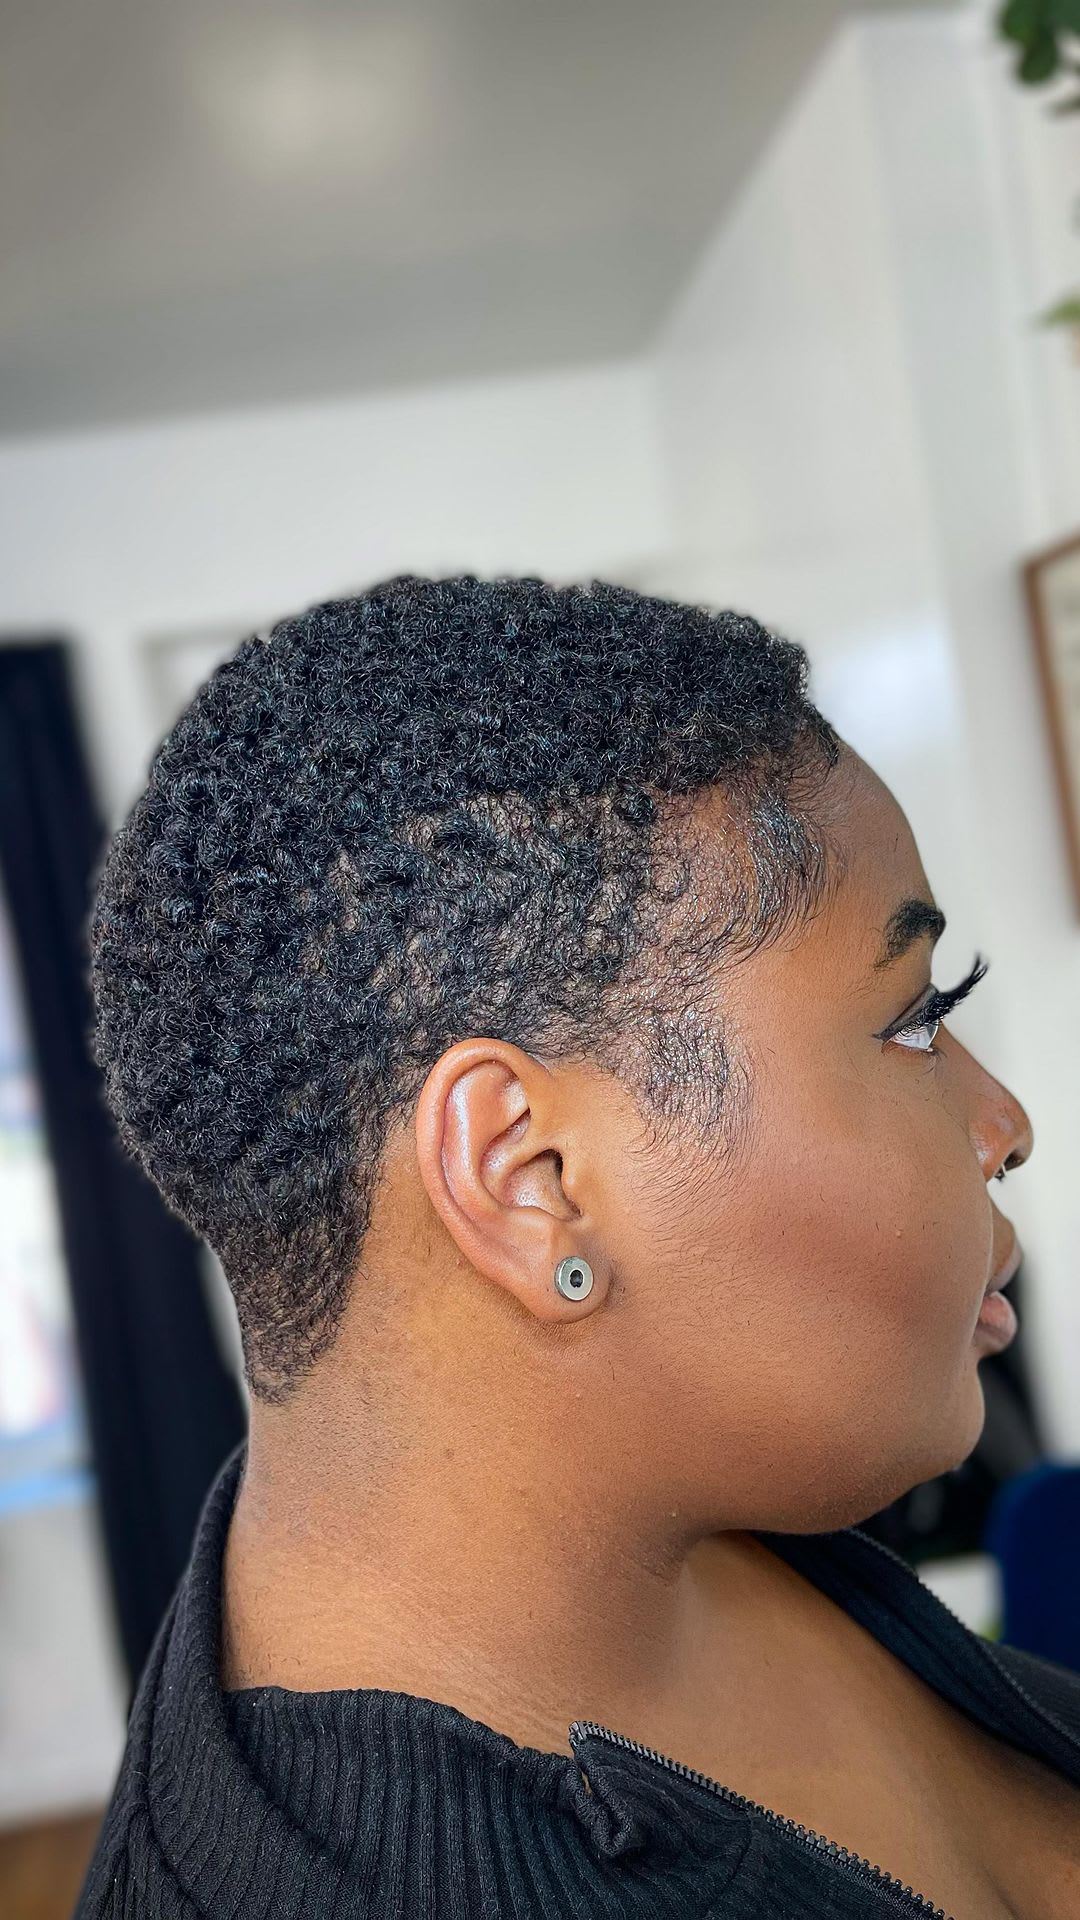 Enhanced Curls with a Low Taper